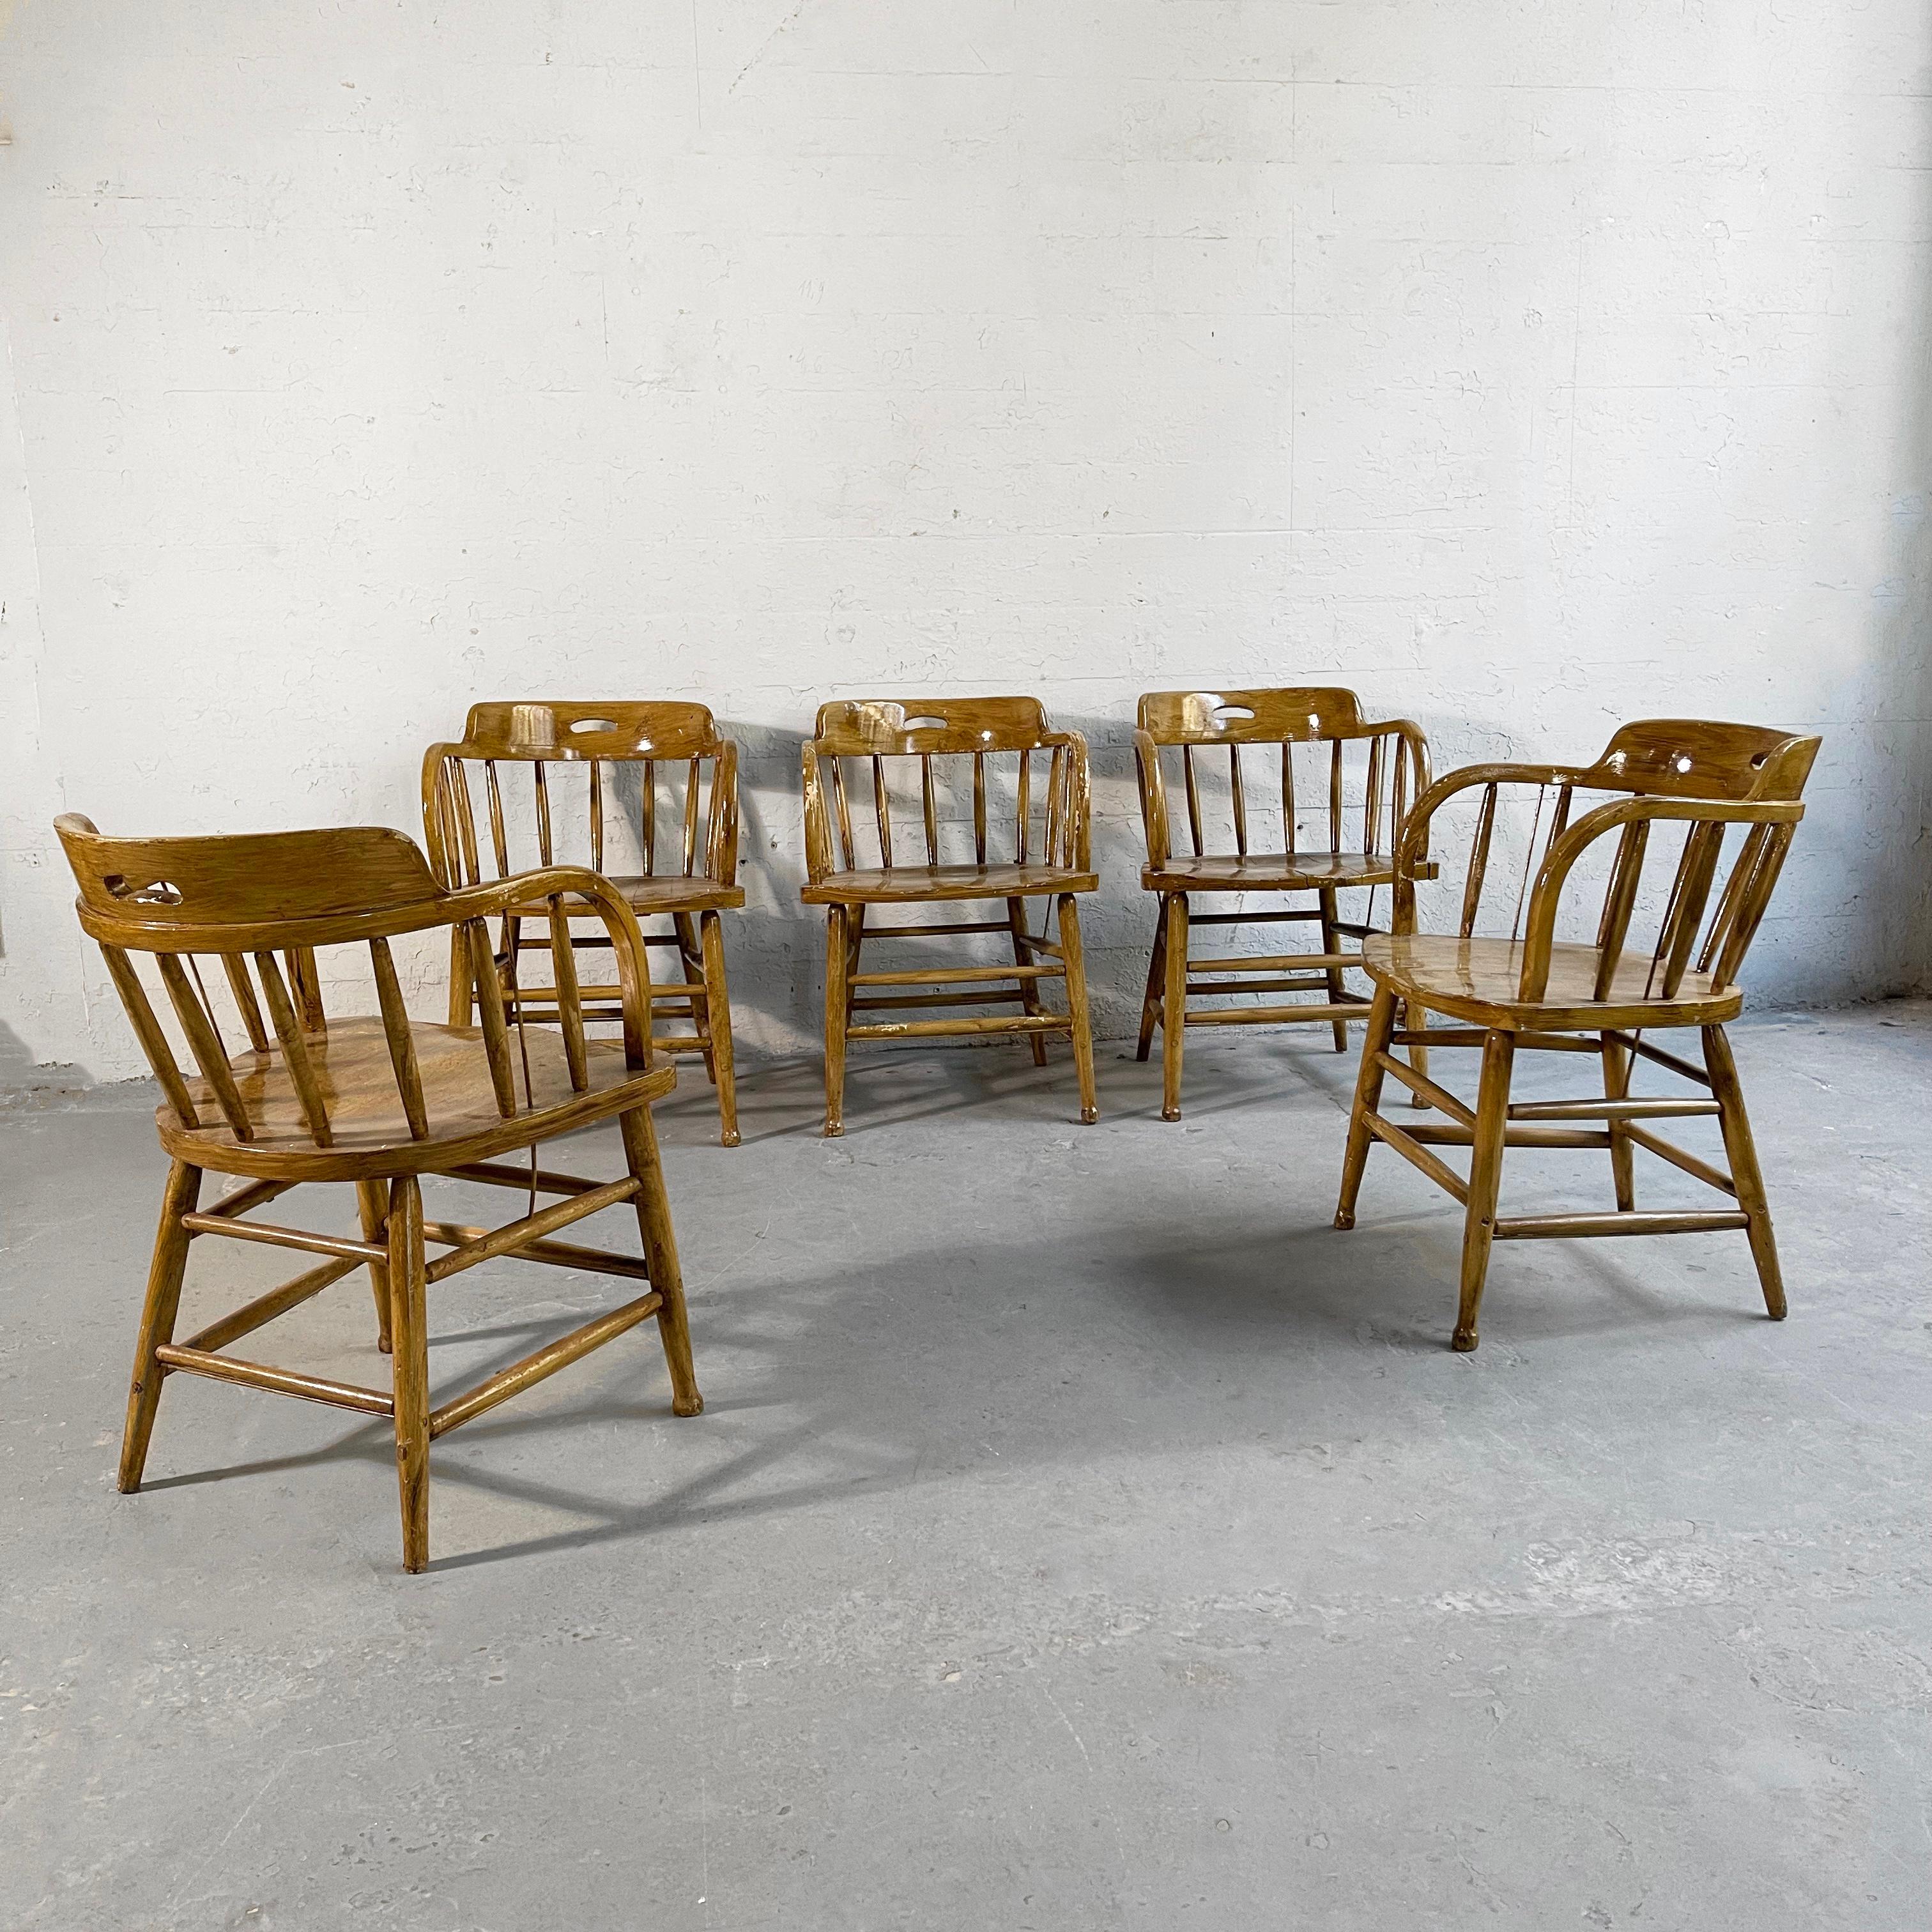 American Craftsman Early 20th Century, Rustic Oak Firehouse Dining Chairs